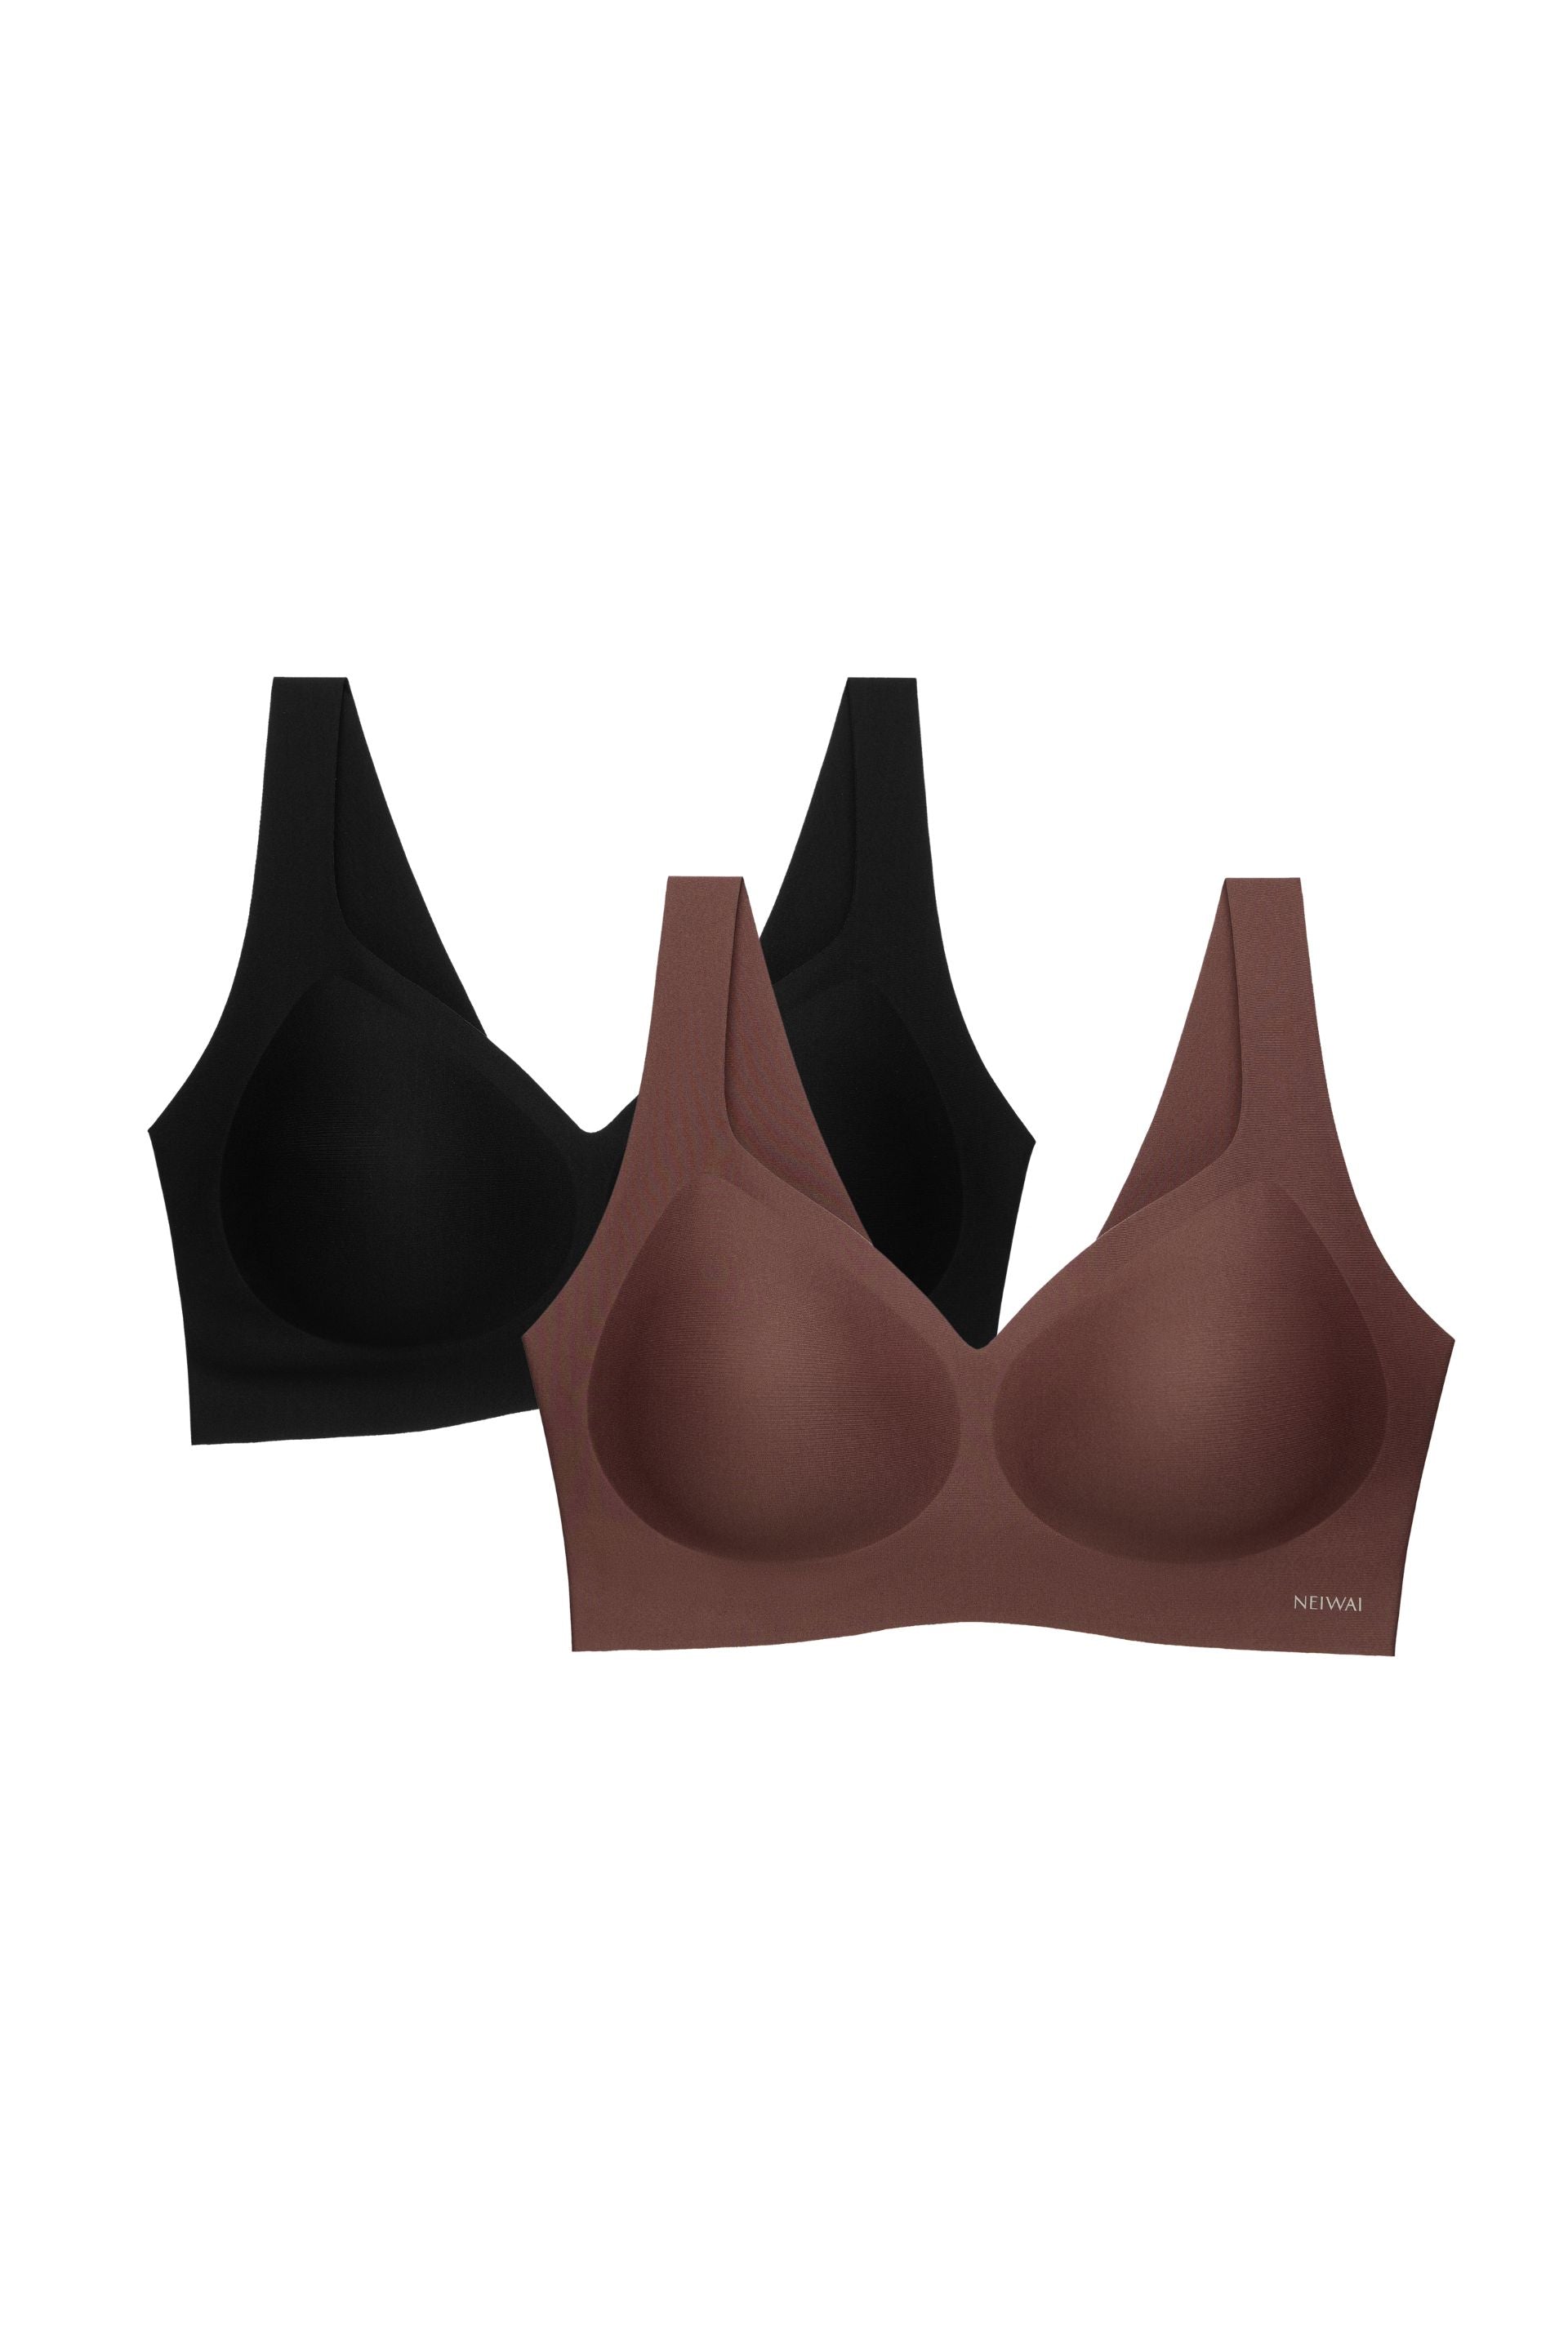 two bras in black and brown